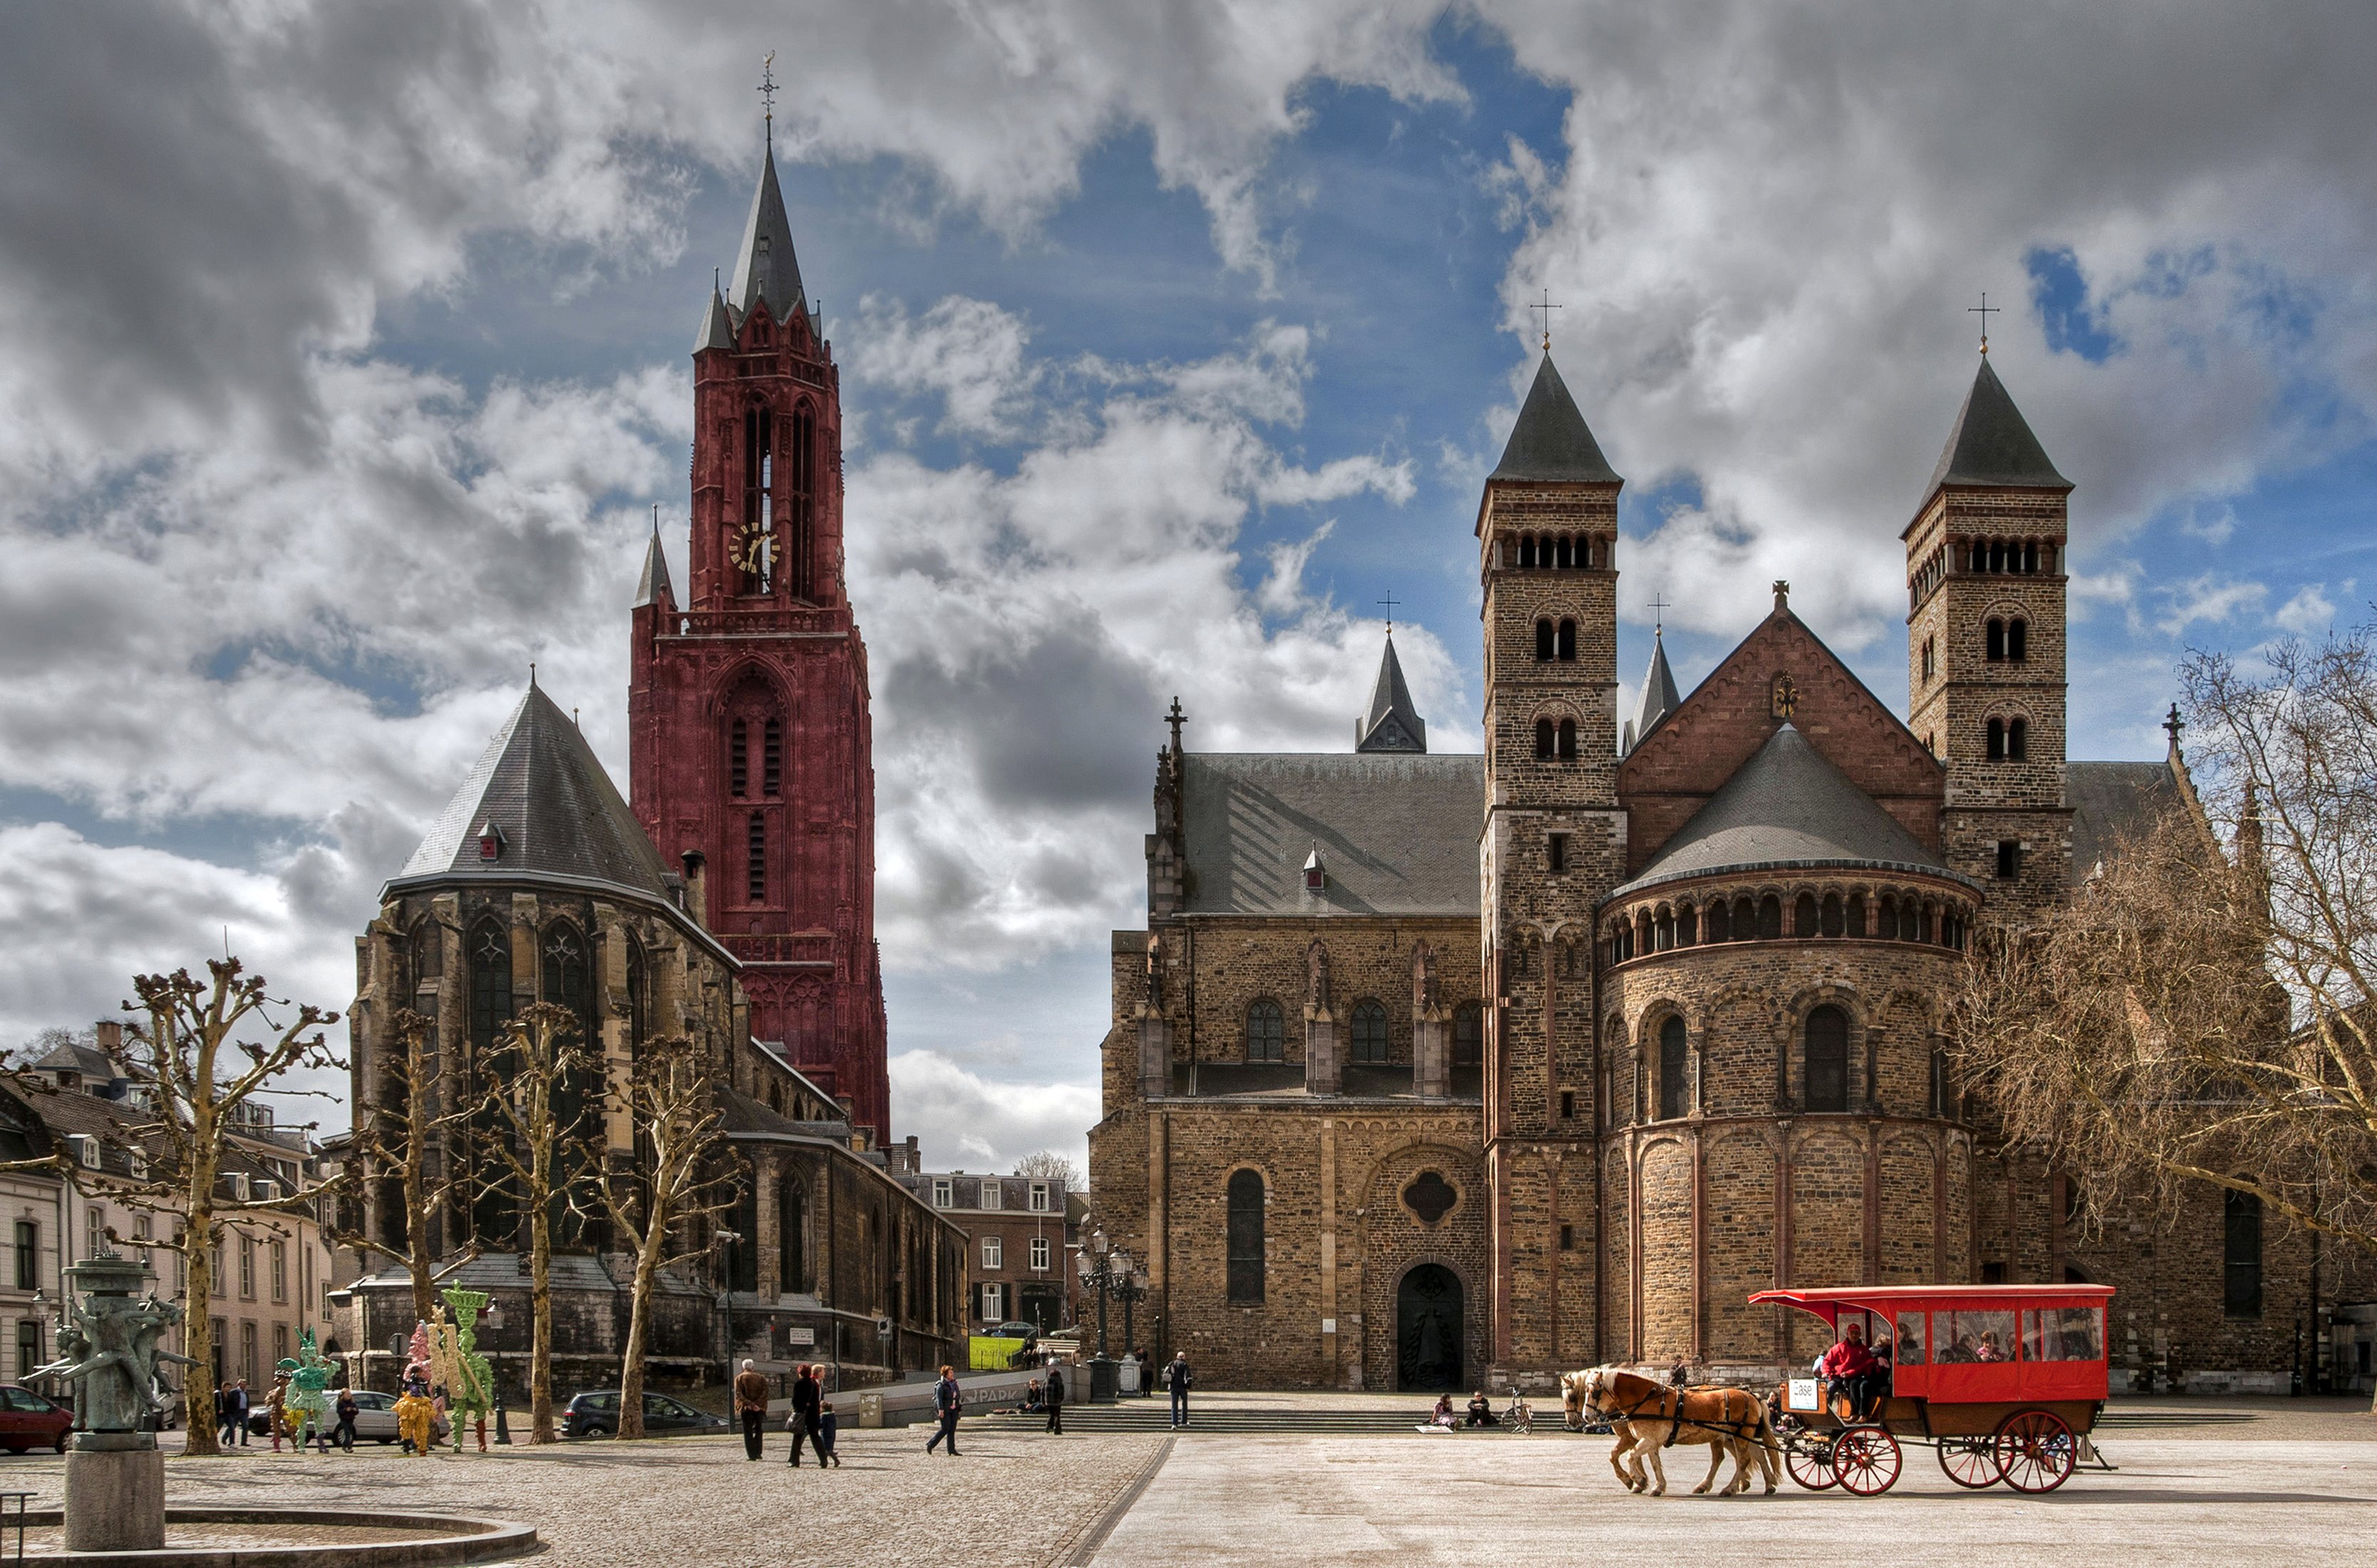 netherlands, Houses, Temples, Street, Carriage, Clouds, Maastricht, Cities Wallpaper